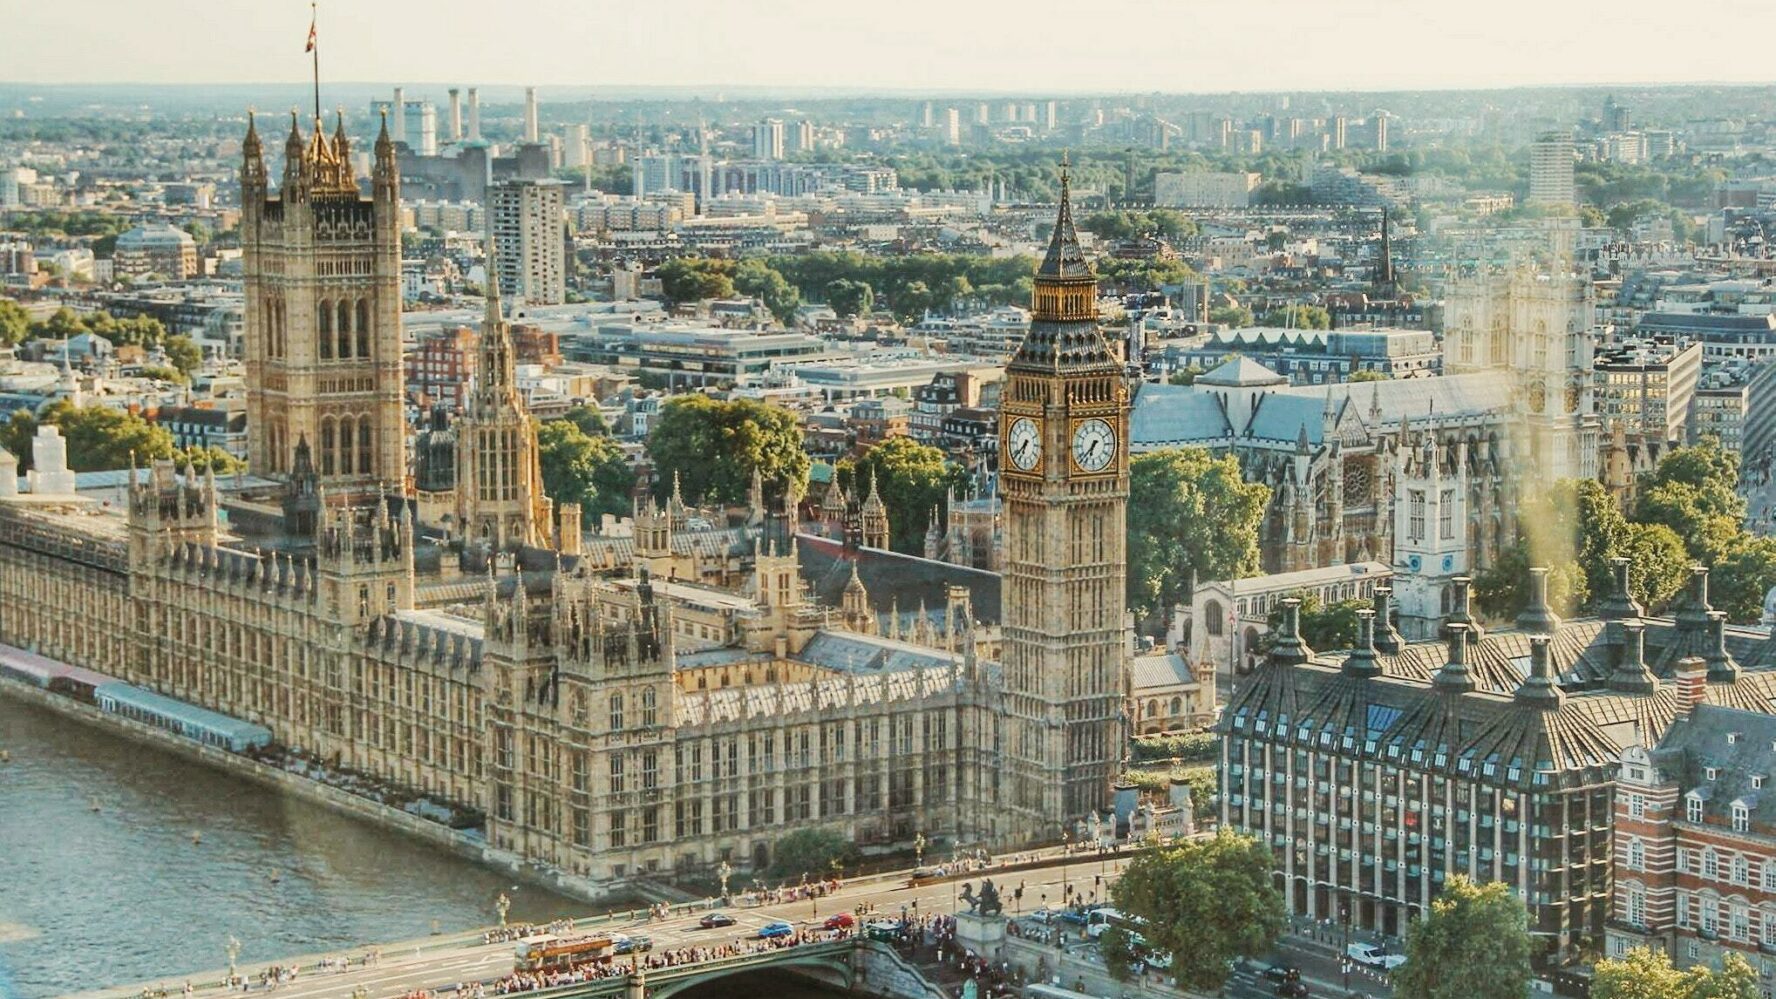 Aerial view of the Houses of Parliament.